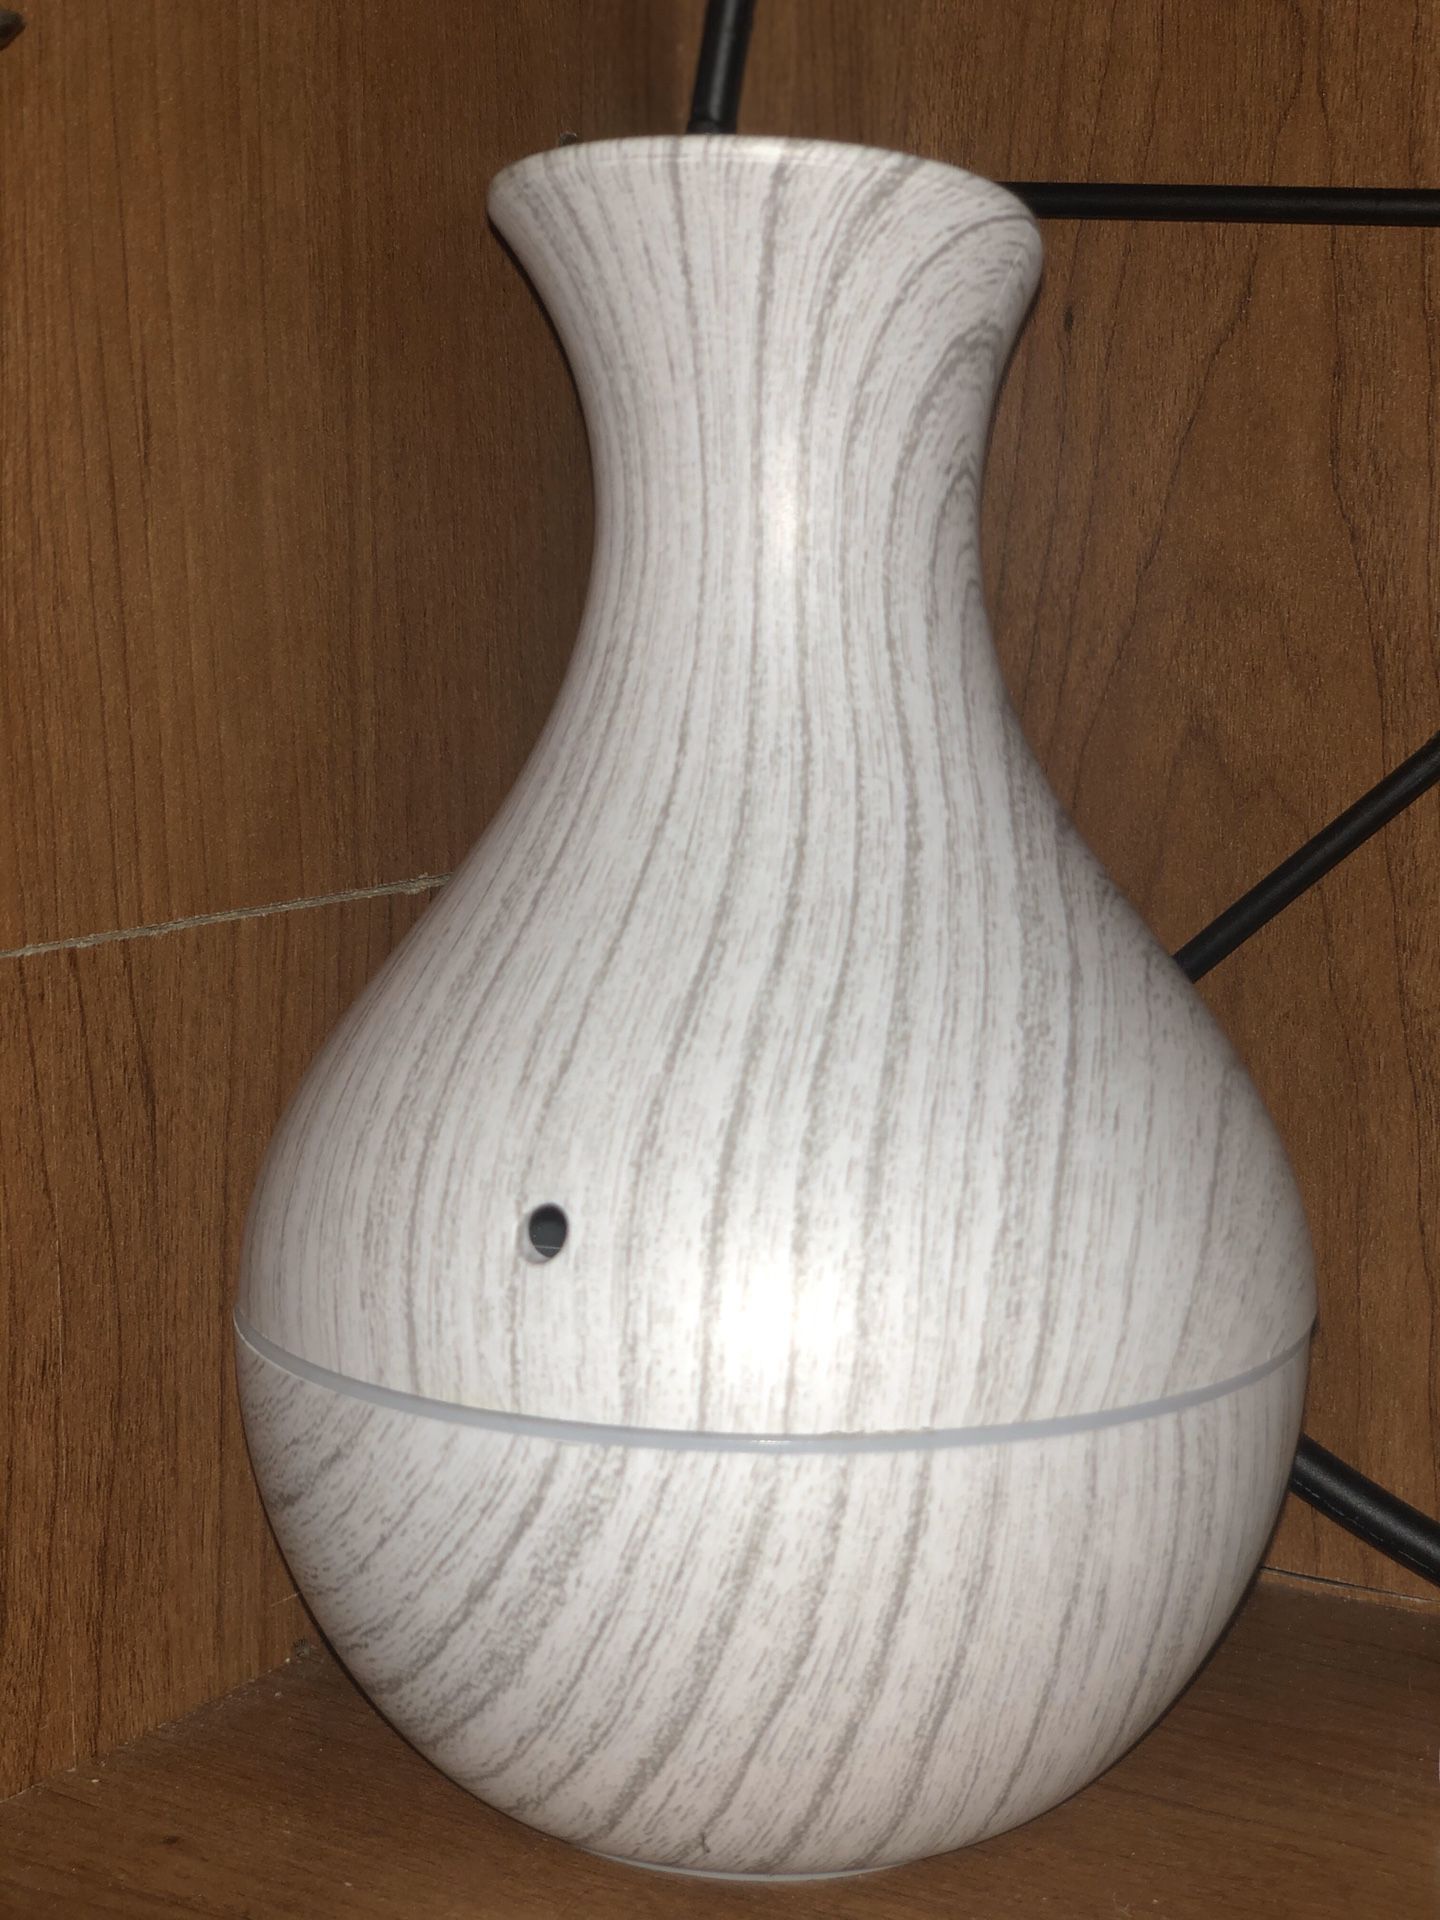 Essential Oil diffuser and Ultrasonic Humidifier